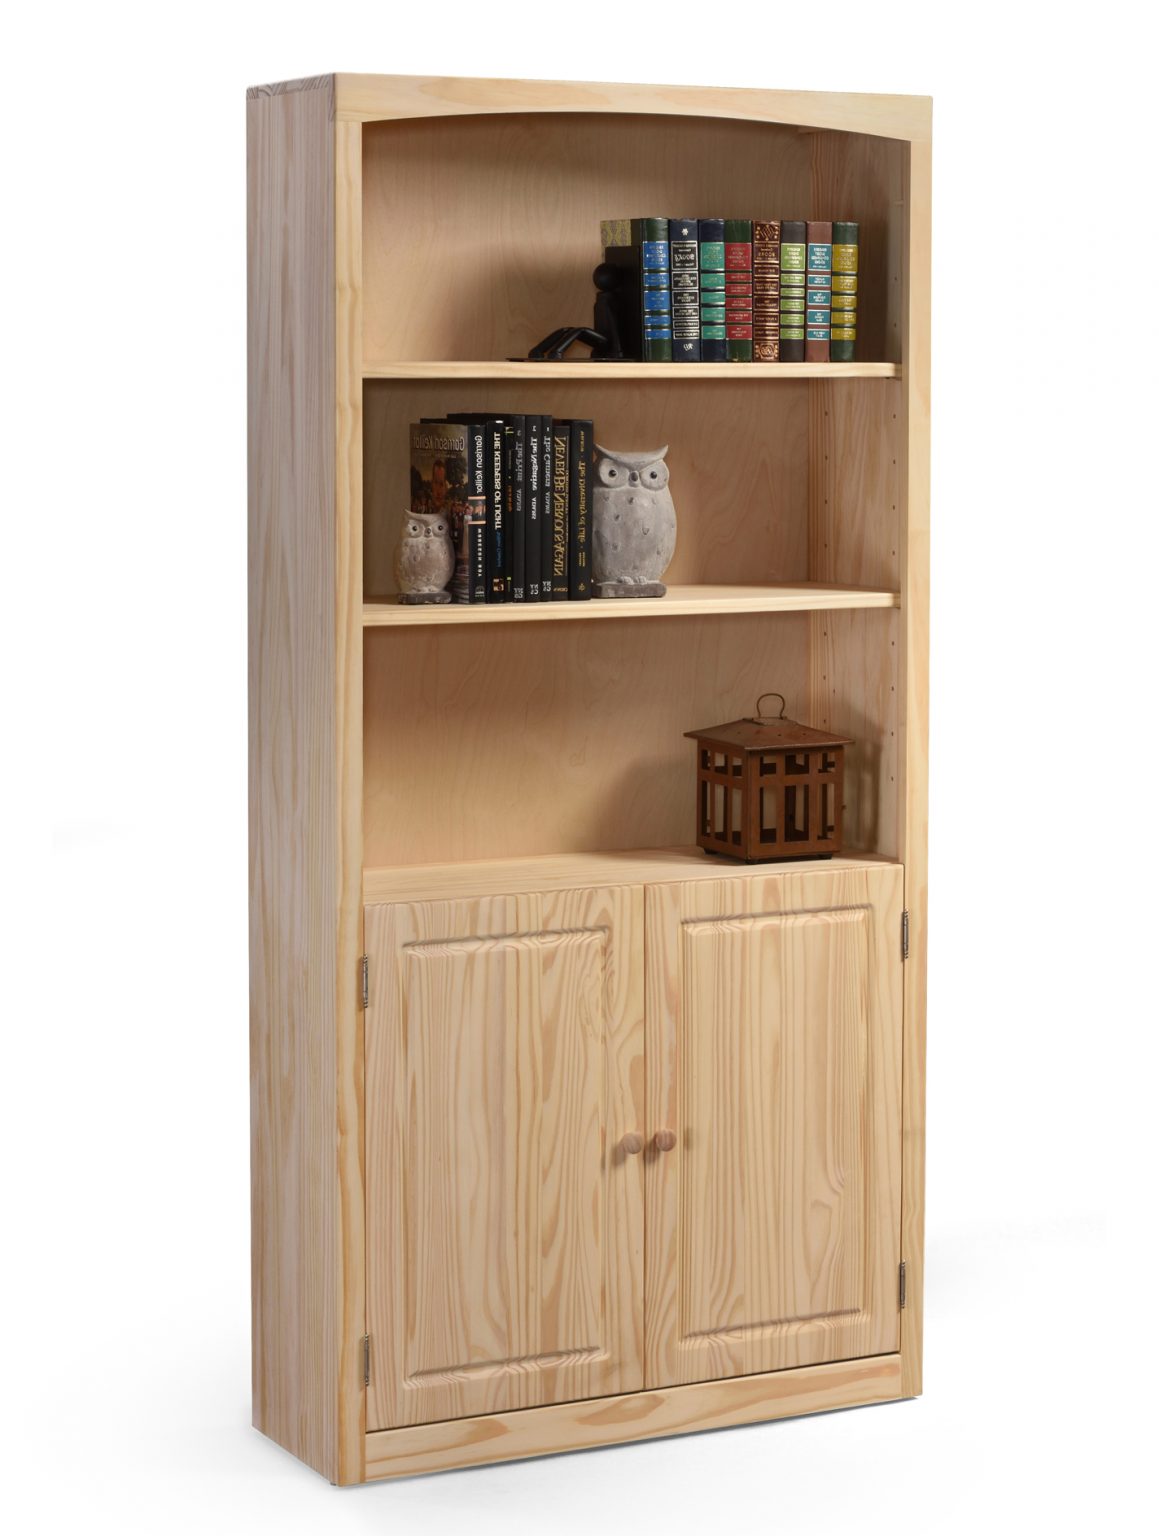 Bookcase 36X72 with Doors - Baconco